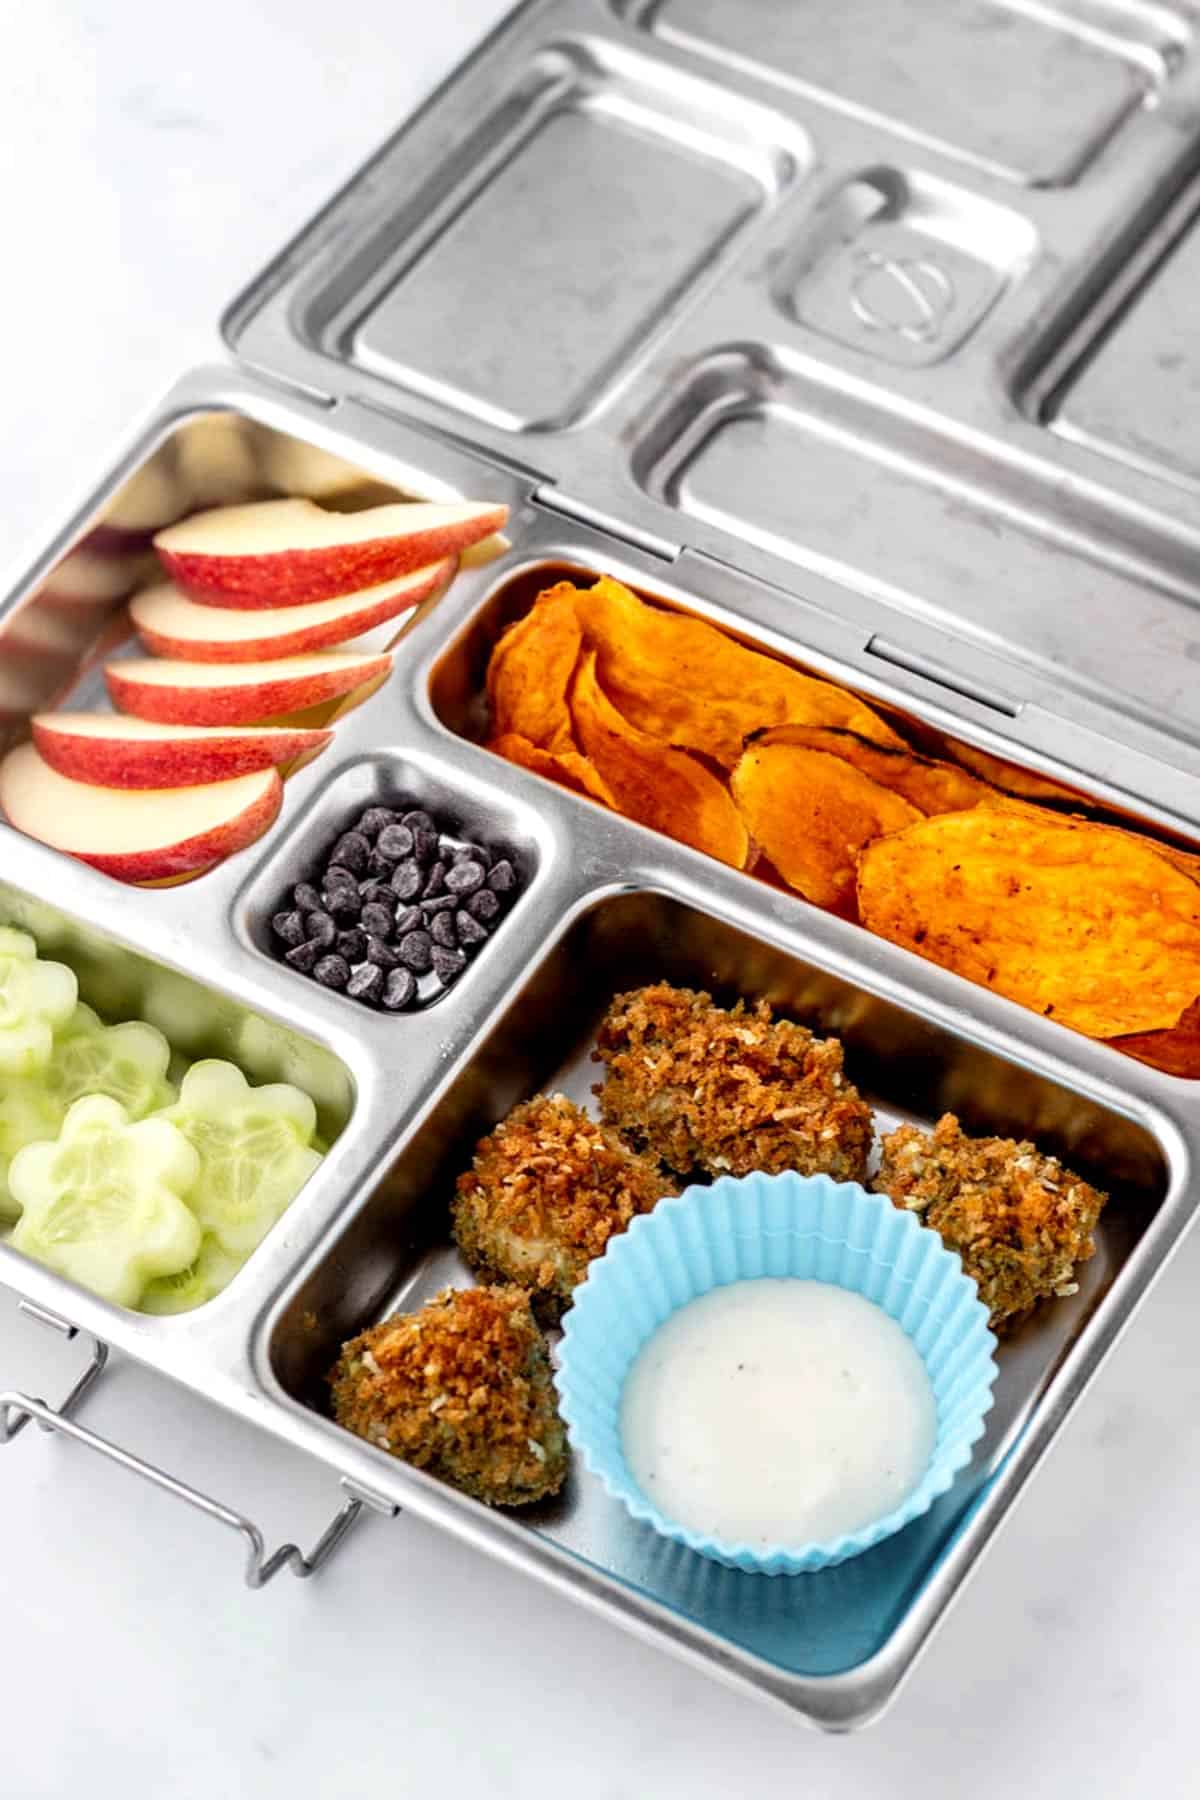 Pesto chicken bites in a lunch box with apples, cucumbers, sweet potato chips and chocolate chips.